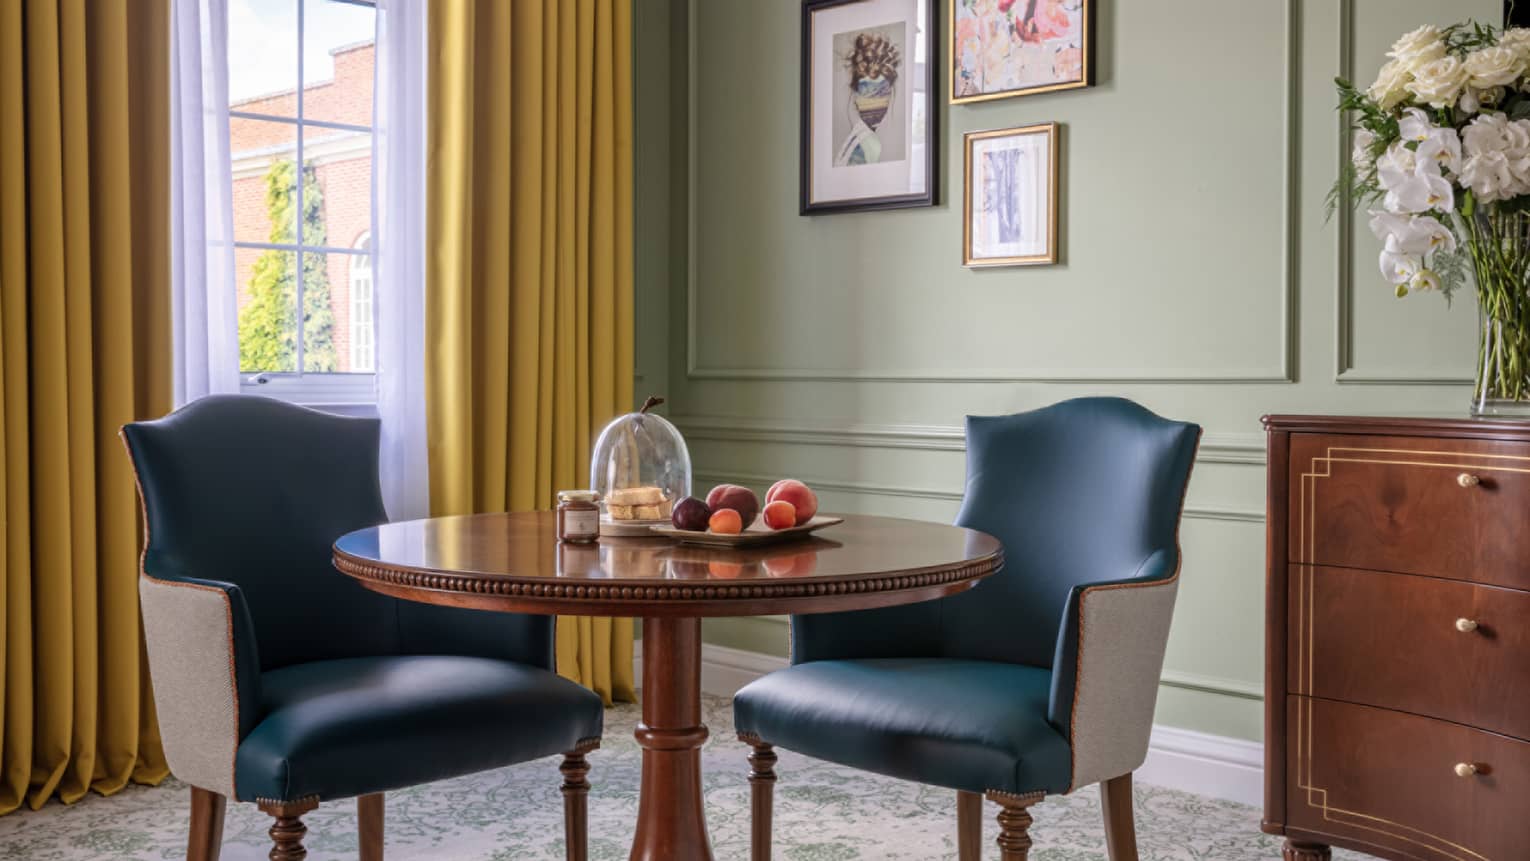 Table for two with blue leather chairs, cherry wardrobe, floor-to-ceiling window with yellow drapes